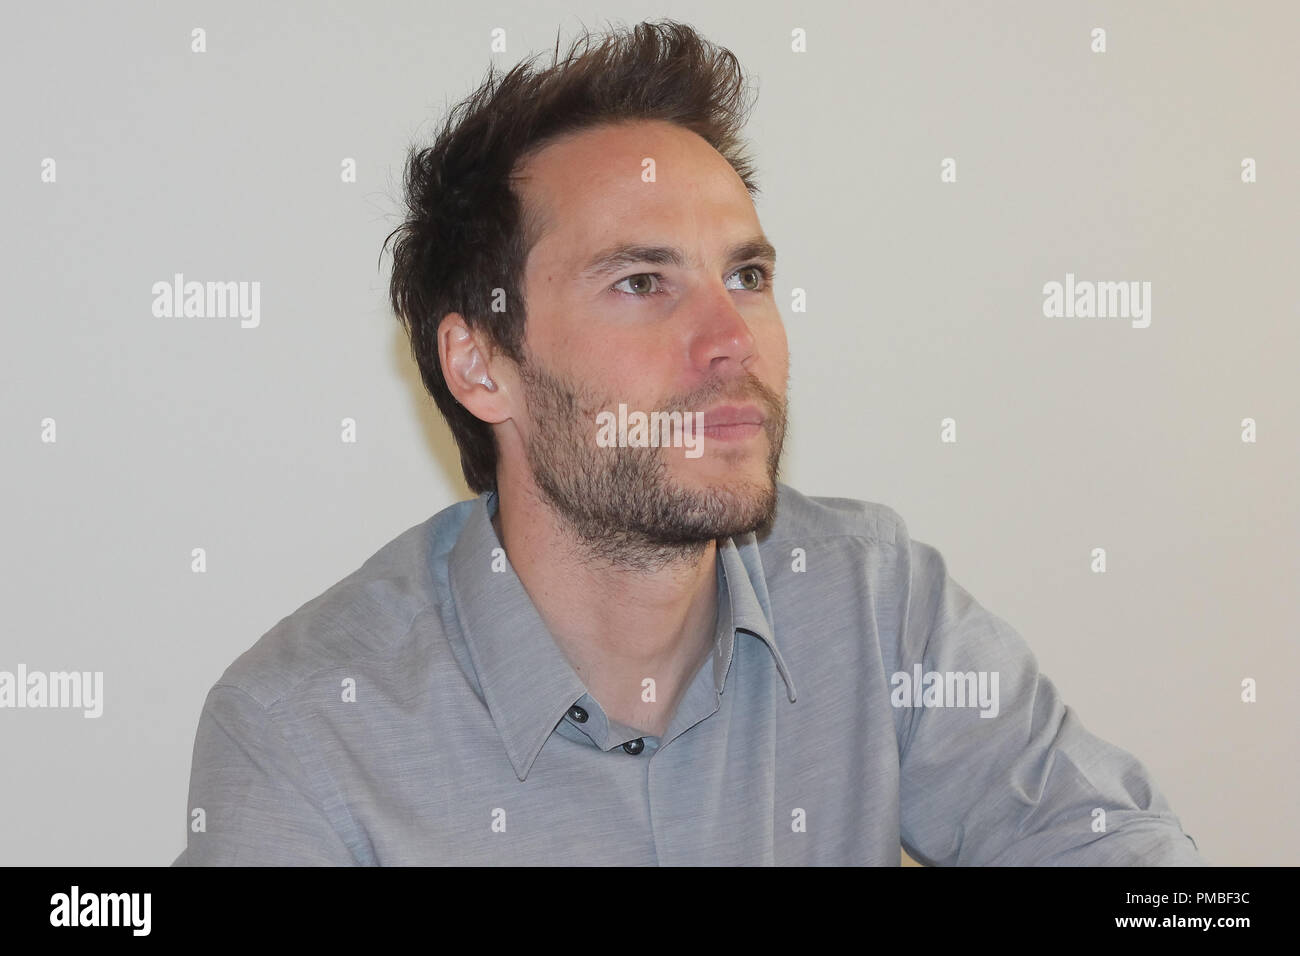 Taylor Kitsch at 'American Assassin' Press Conference held on July 24, 2017 at the Four Seasons Hotel in Beverly Hills,  California. No Tabloids. No USA sales for 30 days of origination. File Reference # 33384 010JRC  For Editorial Use Only -  All Rights Reserved Stock Photo